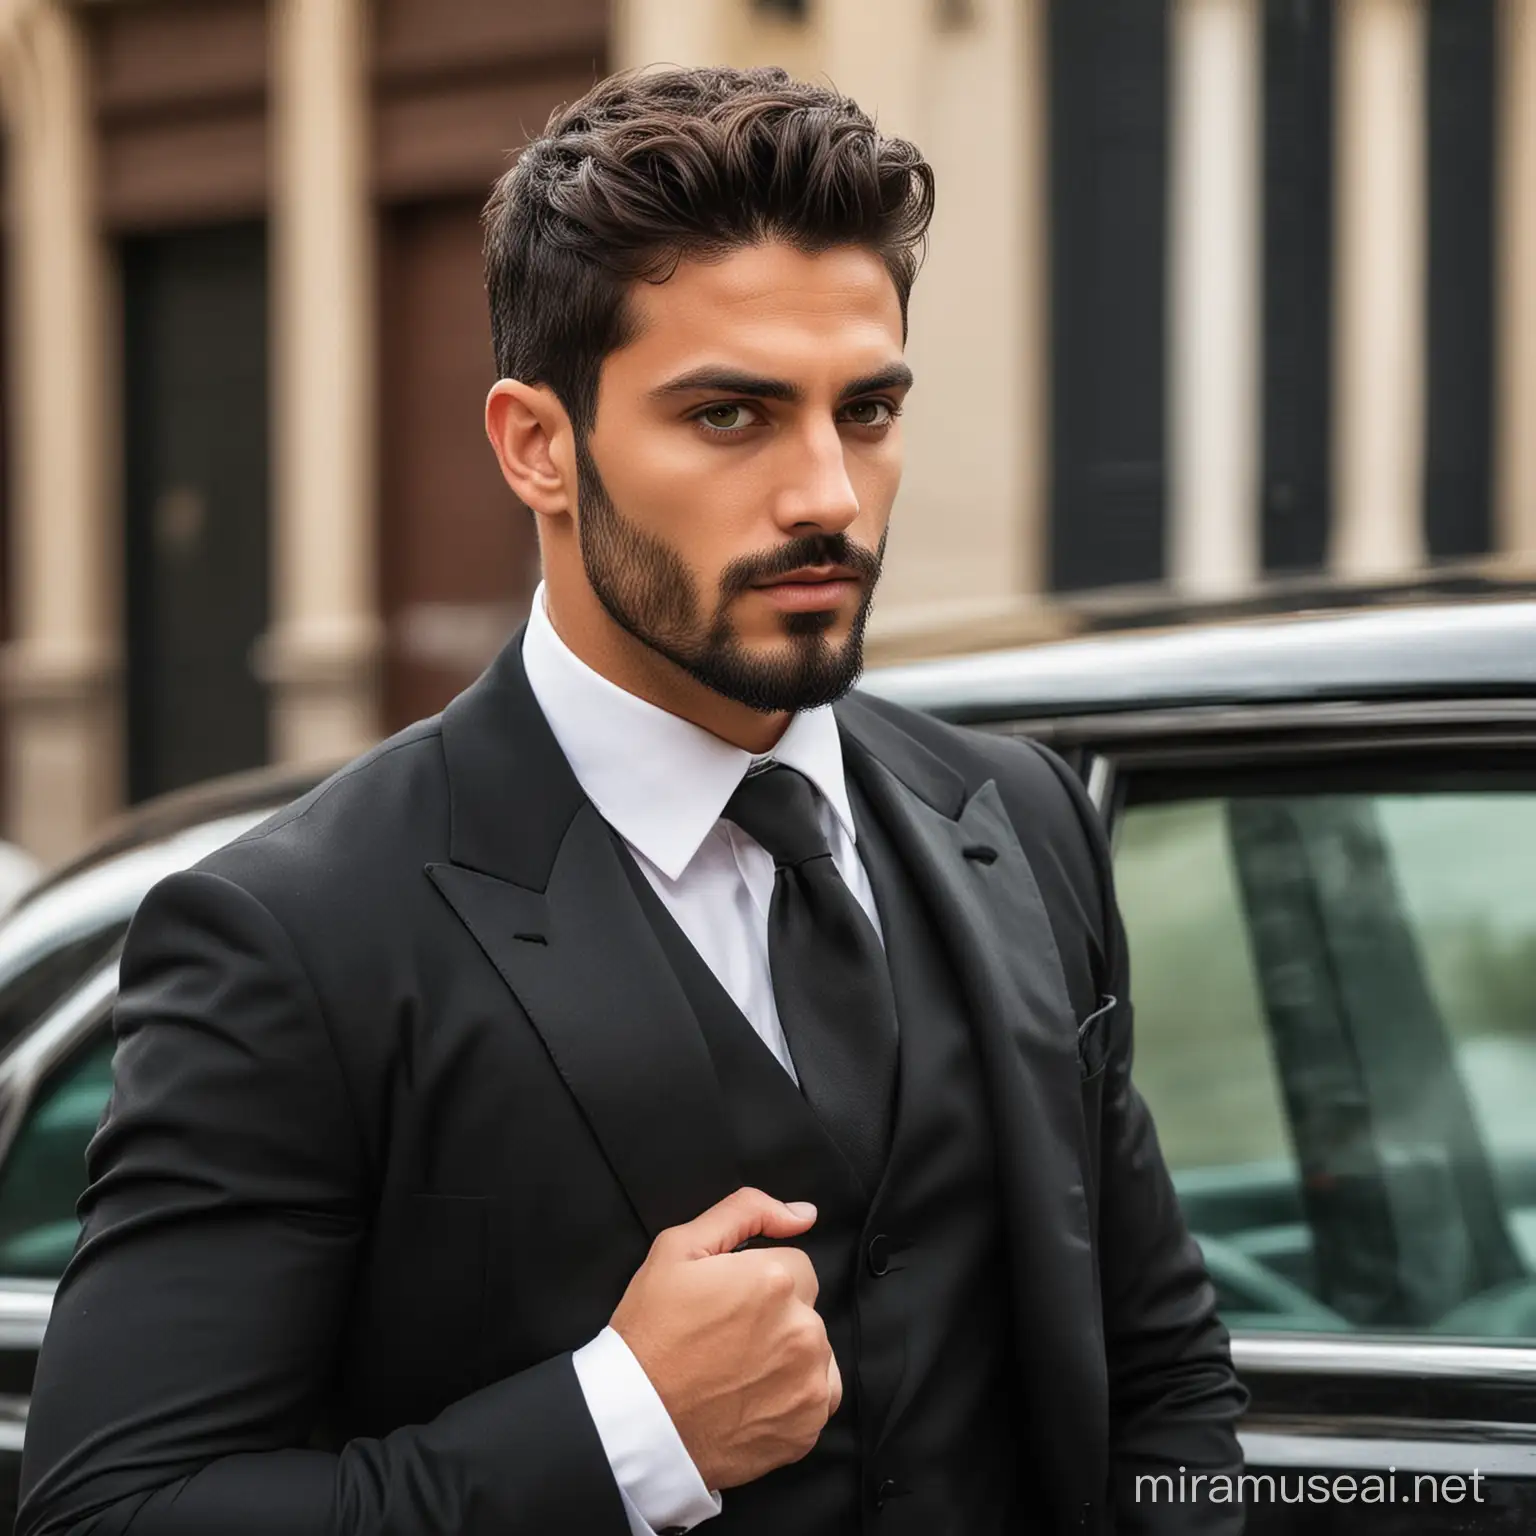 A 27 year old handsome rich man 6"4 with olive skin dark hair green eyes dark stubble beard wearing a black tuxedo suit standing by the car. Looking hot and ruthless mafia boss Italian 